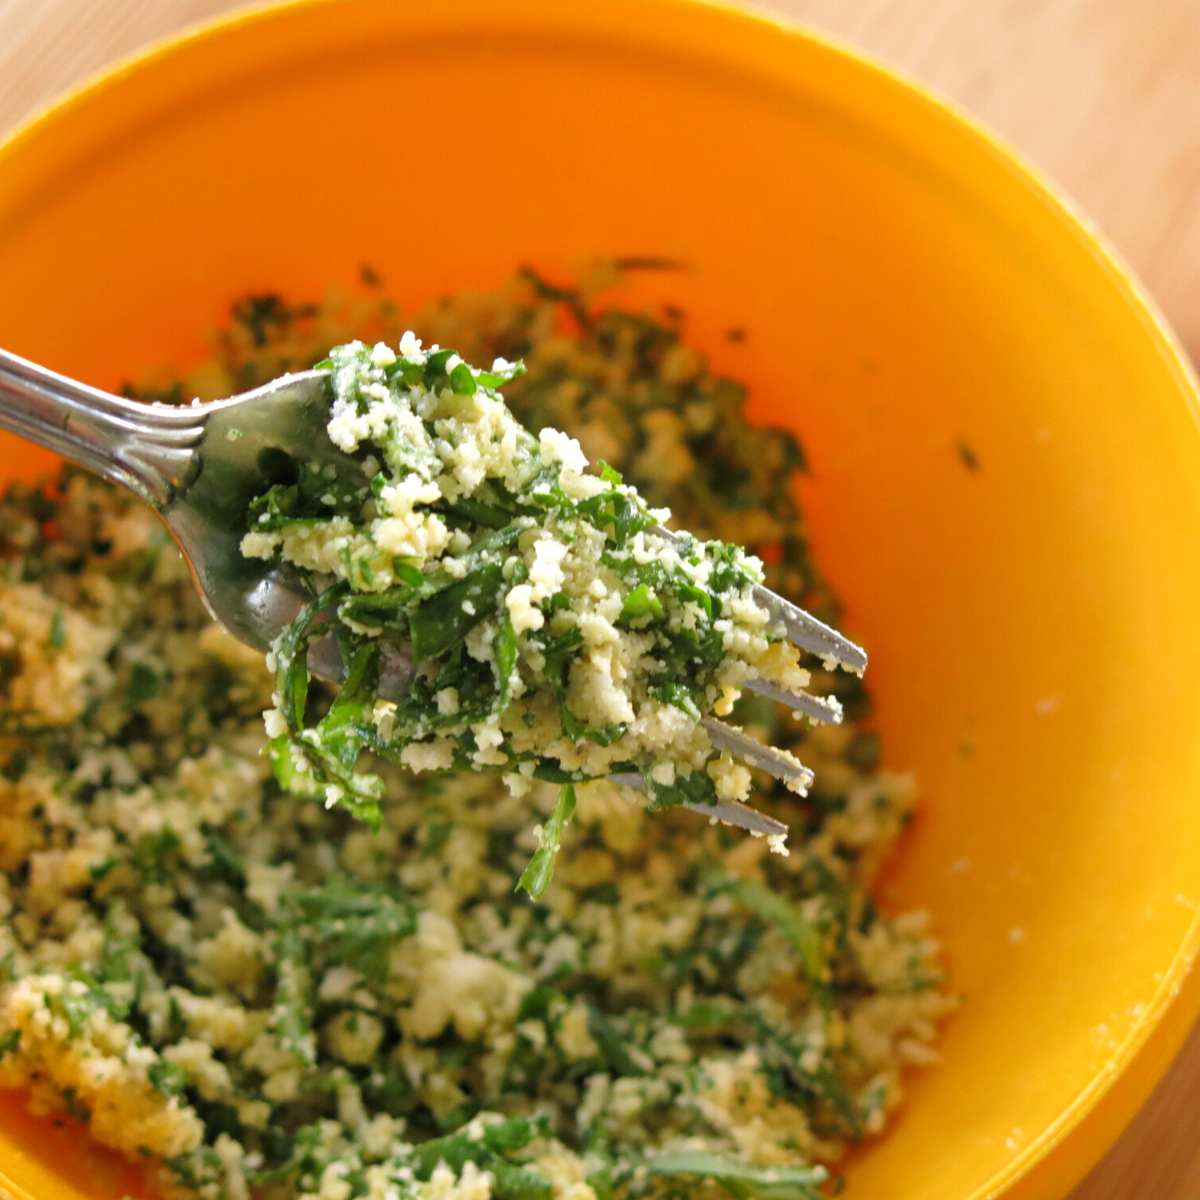 Fork holding fresh herb and Parmesan breading over a bowl with more.